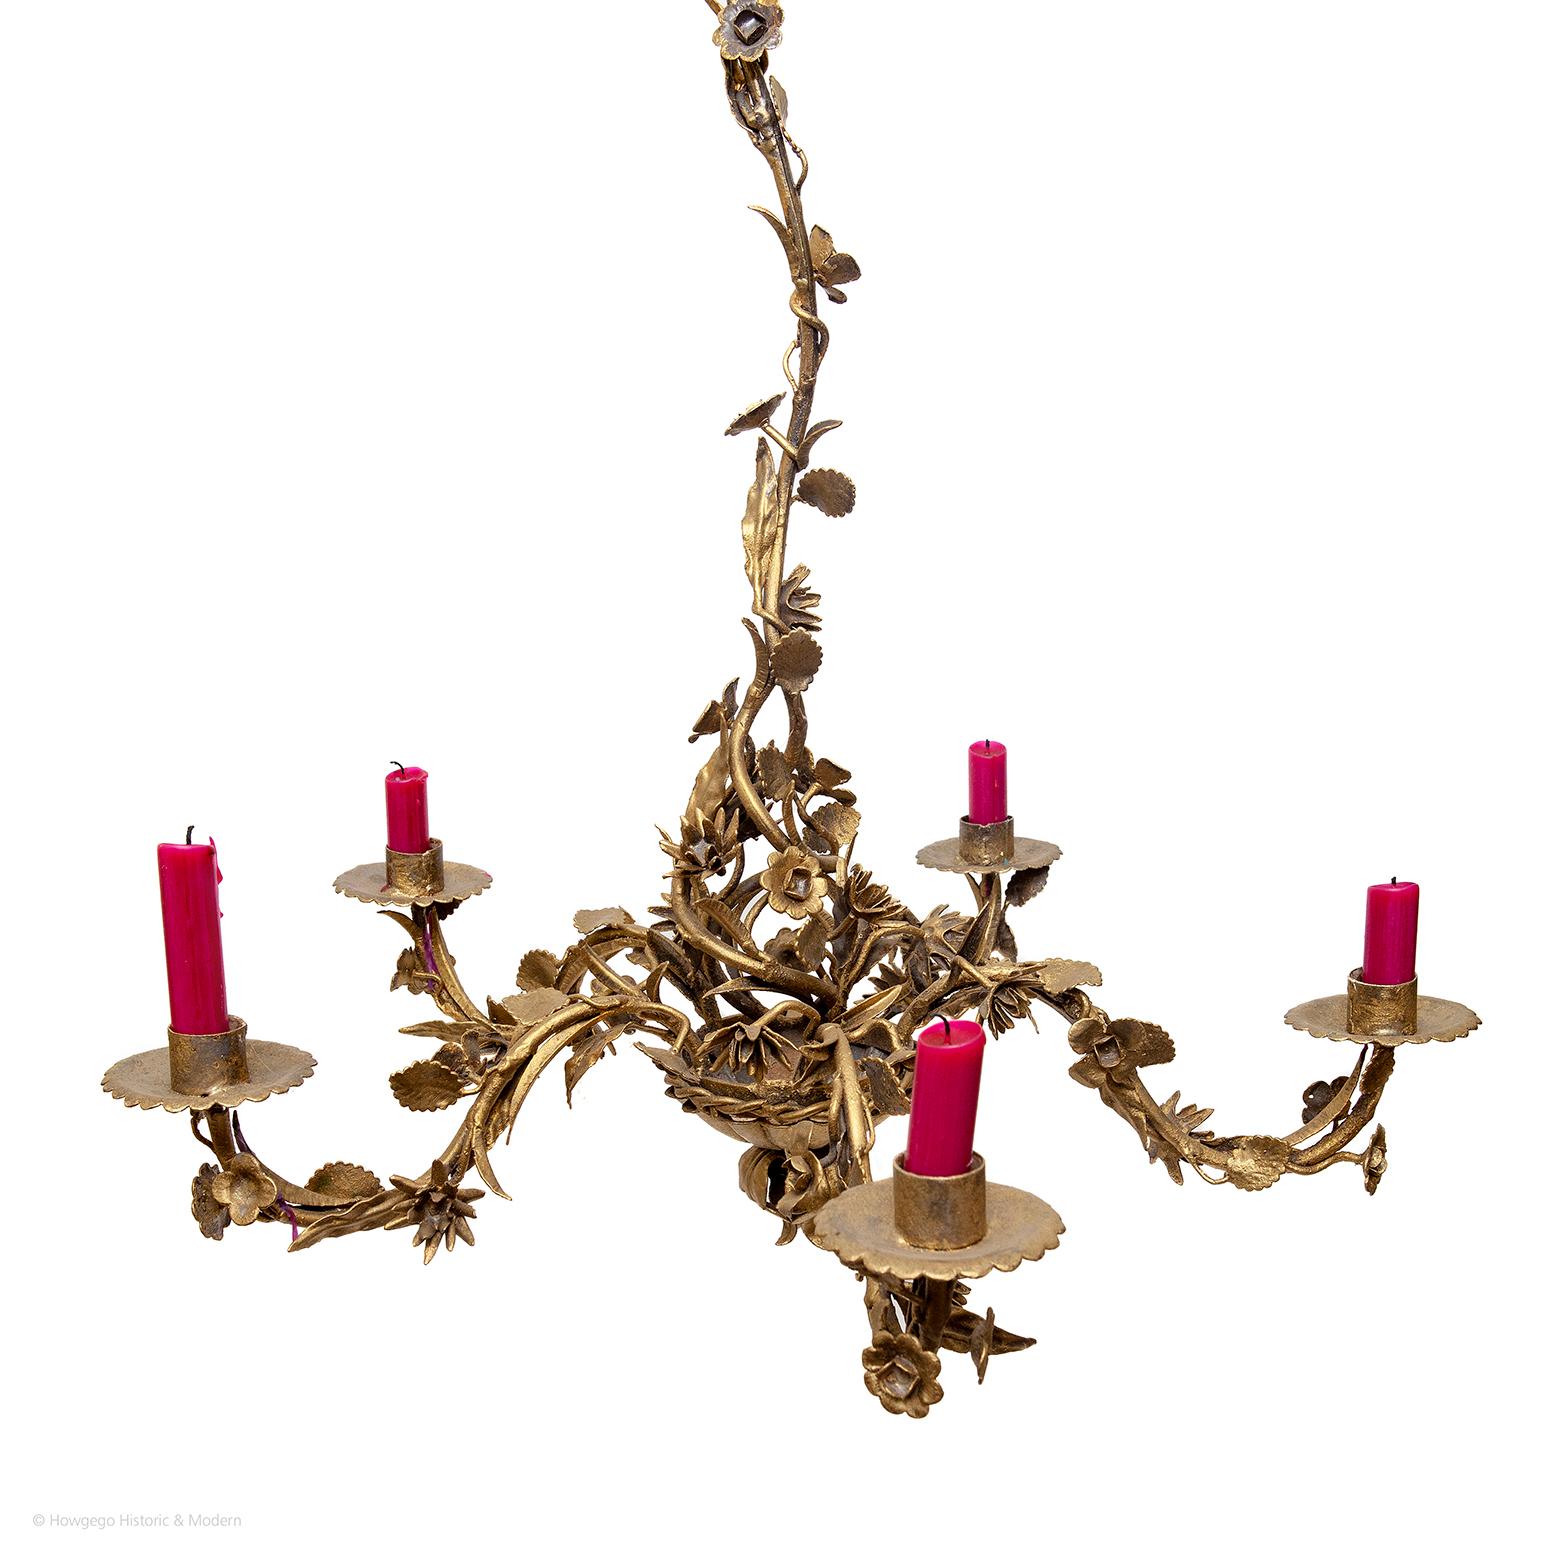 A VINTAGE, ORMOLU, 6 ARM/BRANCH, FLORAL GARLAND CHANDELIER, 25½” high, 22½“ diameter
Naturalistic, injecting the fresh, delicate atmosphere of the countryside into the interior
Pretty and delicate with the wildflower garlands wrapped around the